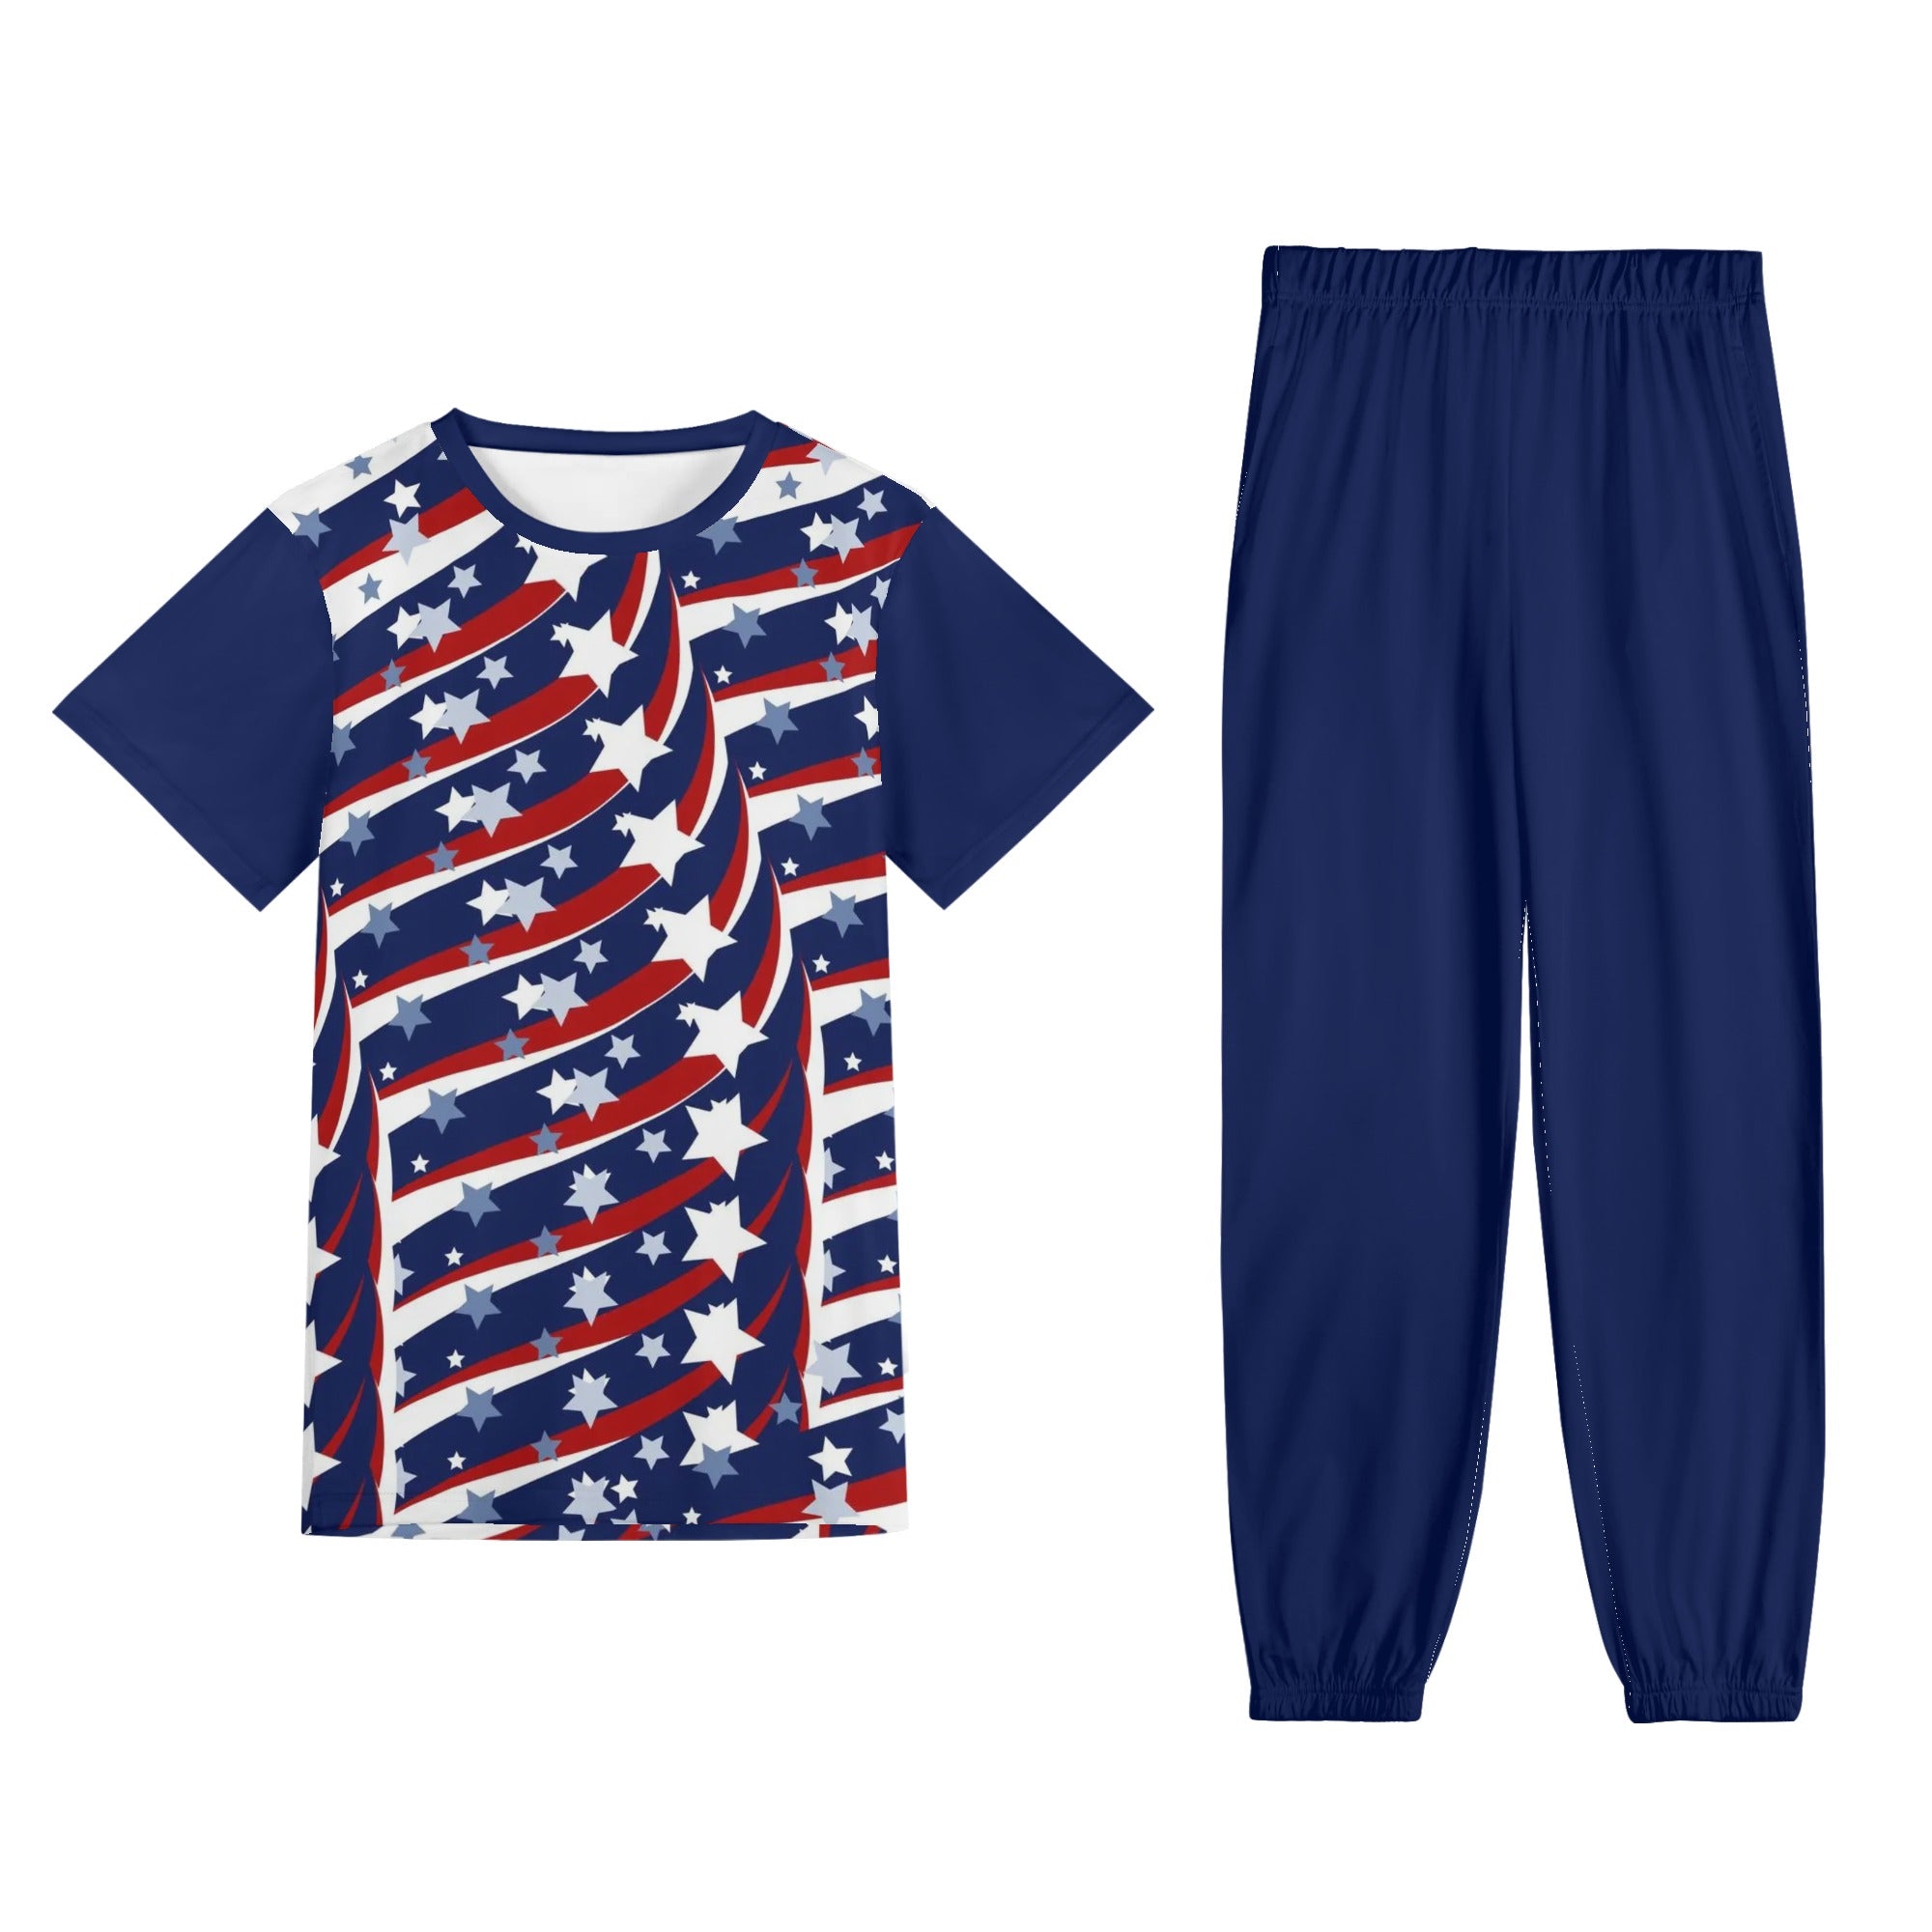 Blue - 4th of July Patriotic Short Sleeve Sports Outfit Set - unisex pants set at TFC&H Co.